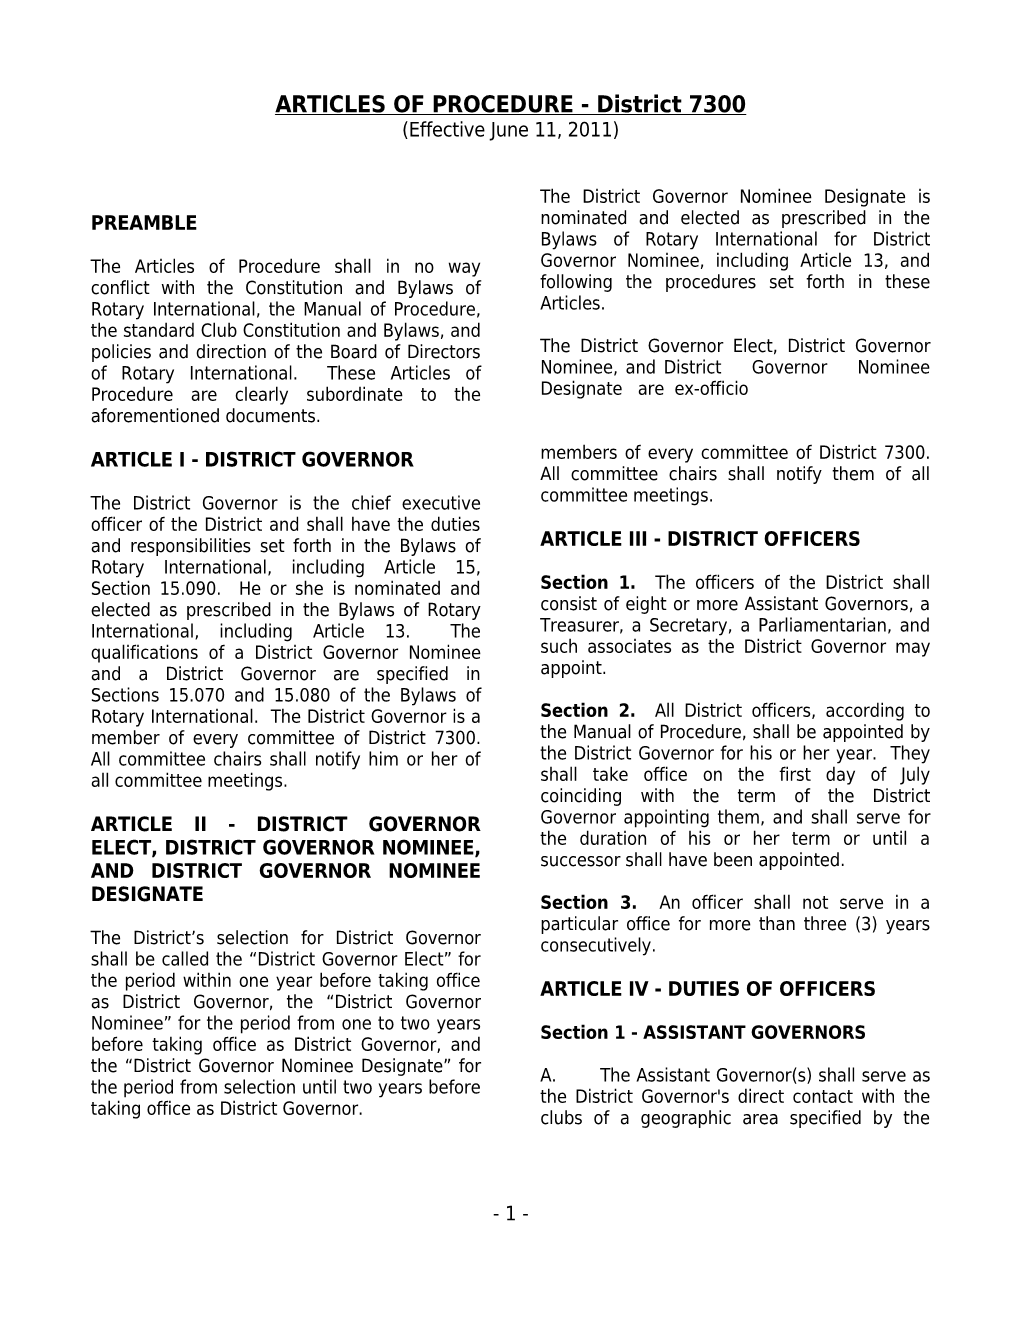 Rotary D7300 Articles of Procedure (As Amended 6-11-2011) (D0100955;1)